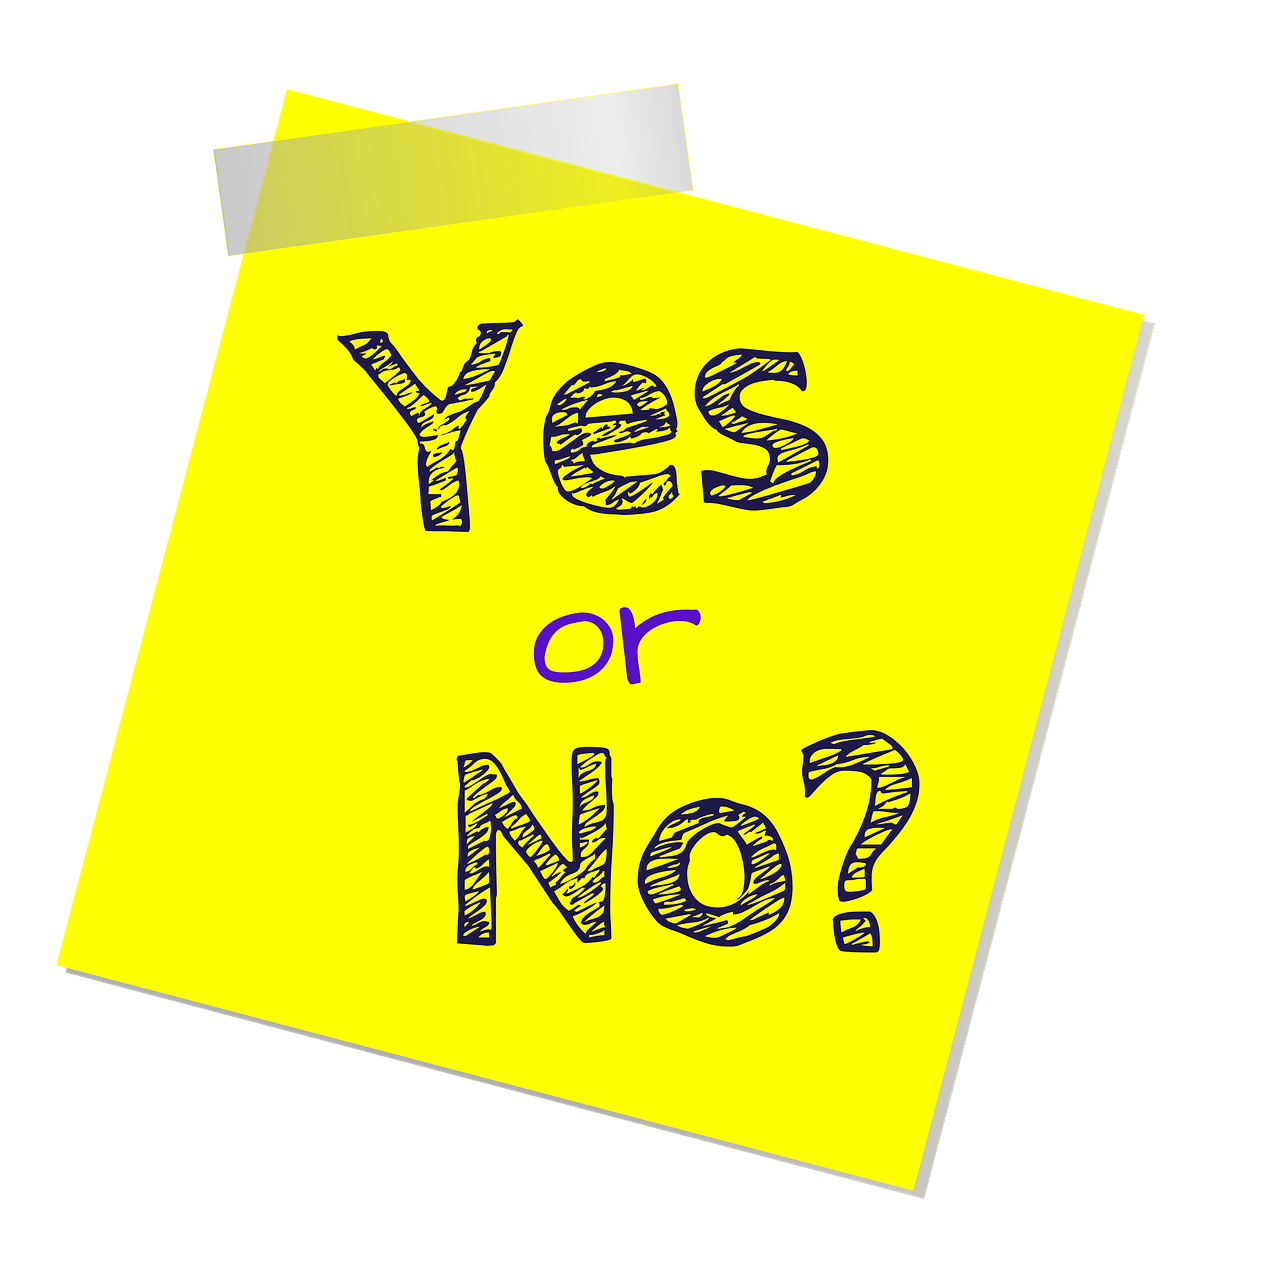 Download free photo of Yes, no, yellow sticker, memory sticker, question -  from needpix.com